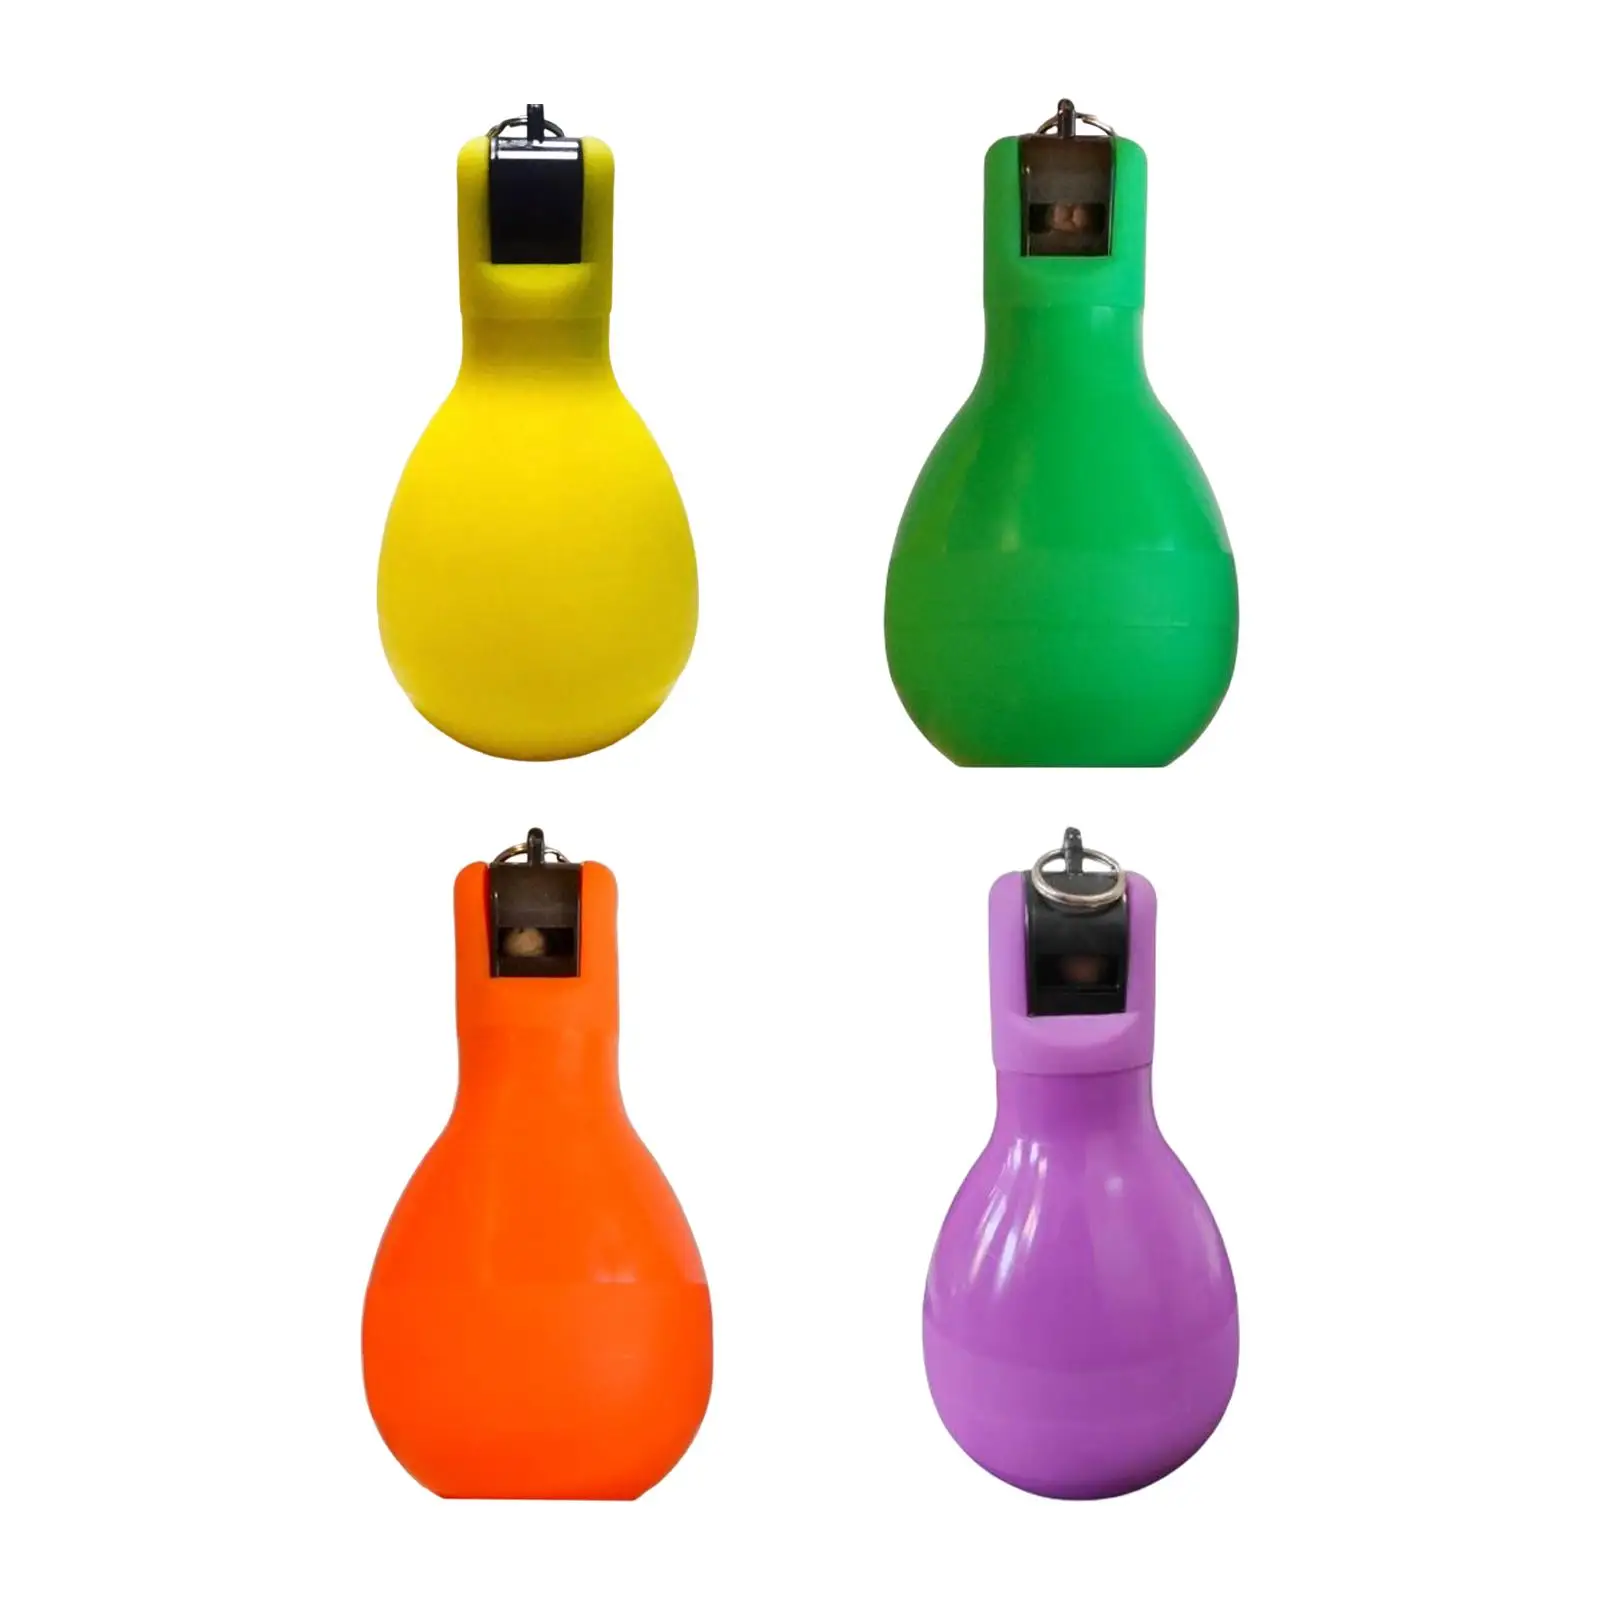 Outdoor Training Whistle Lightweight Sports Loud Sound Handheld Hand Whistles for Gift Boating Basketball